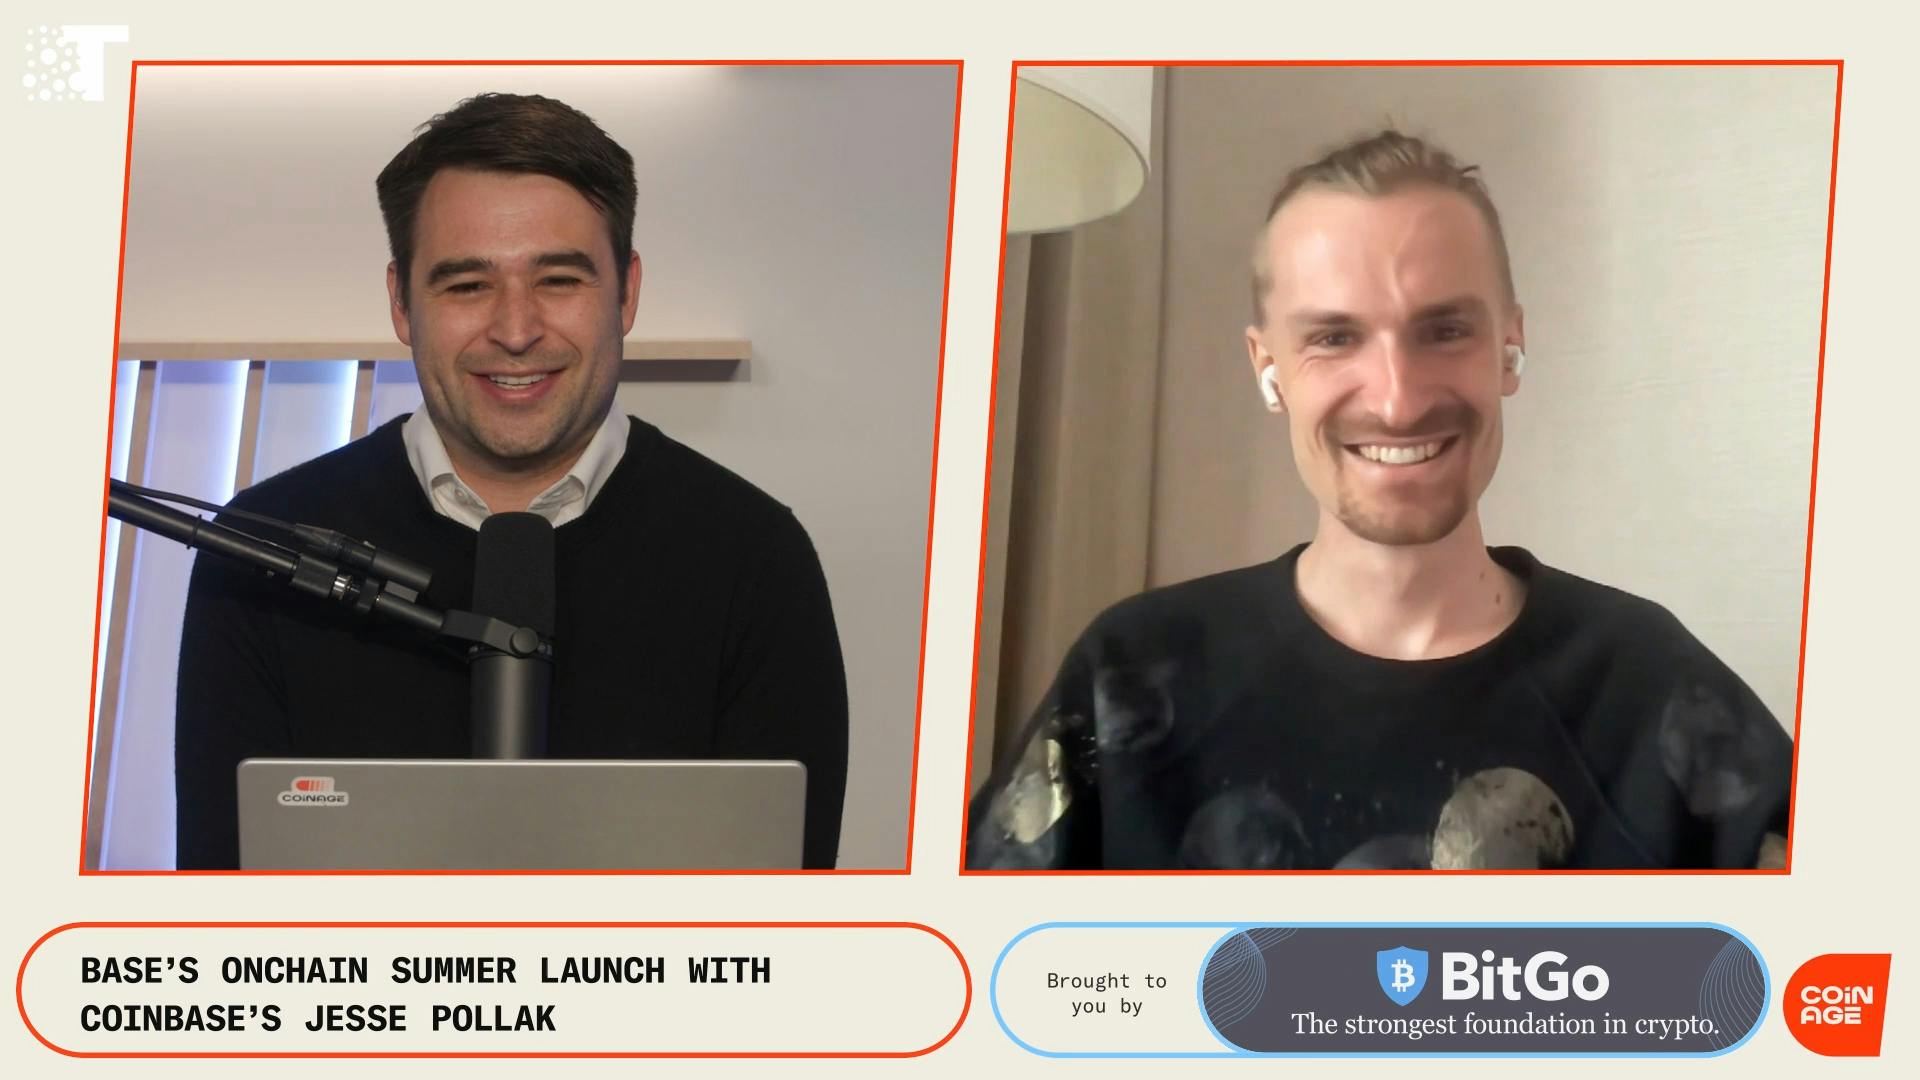 Coinbase's Jesse Pollak joined Coinage to explain what the roadmap for its ambitious chain looks like. He also ... minted a Coinage NFT live on air. Absolute legend.